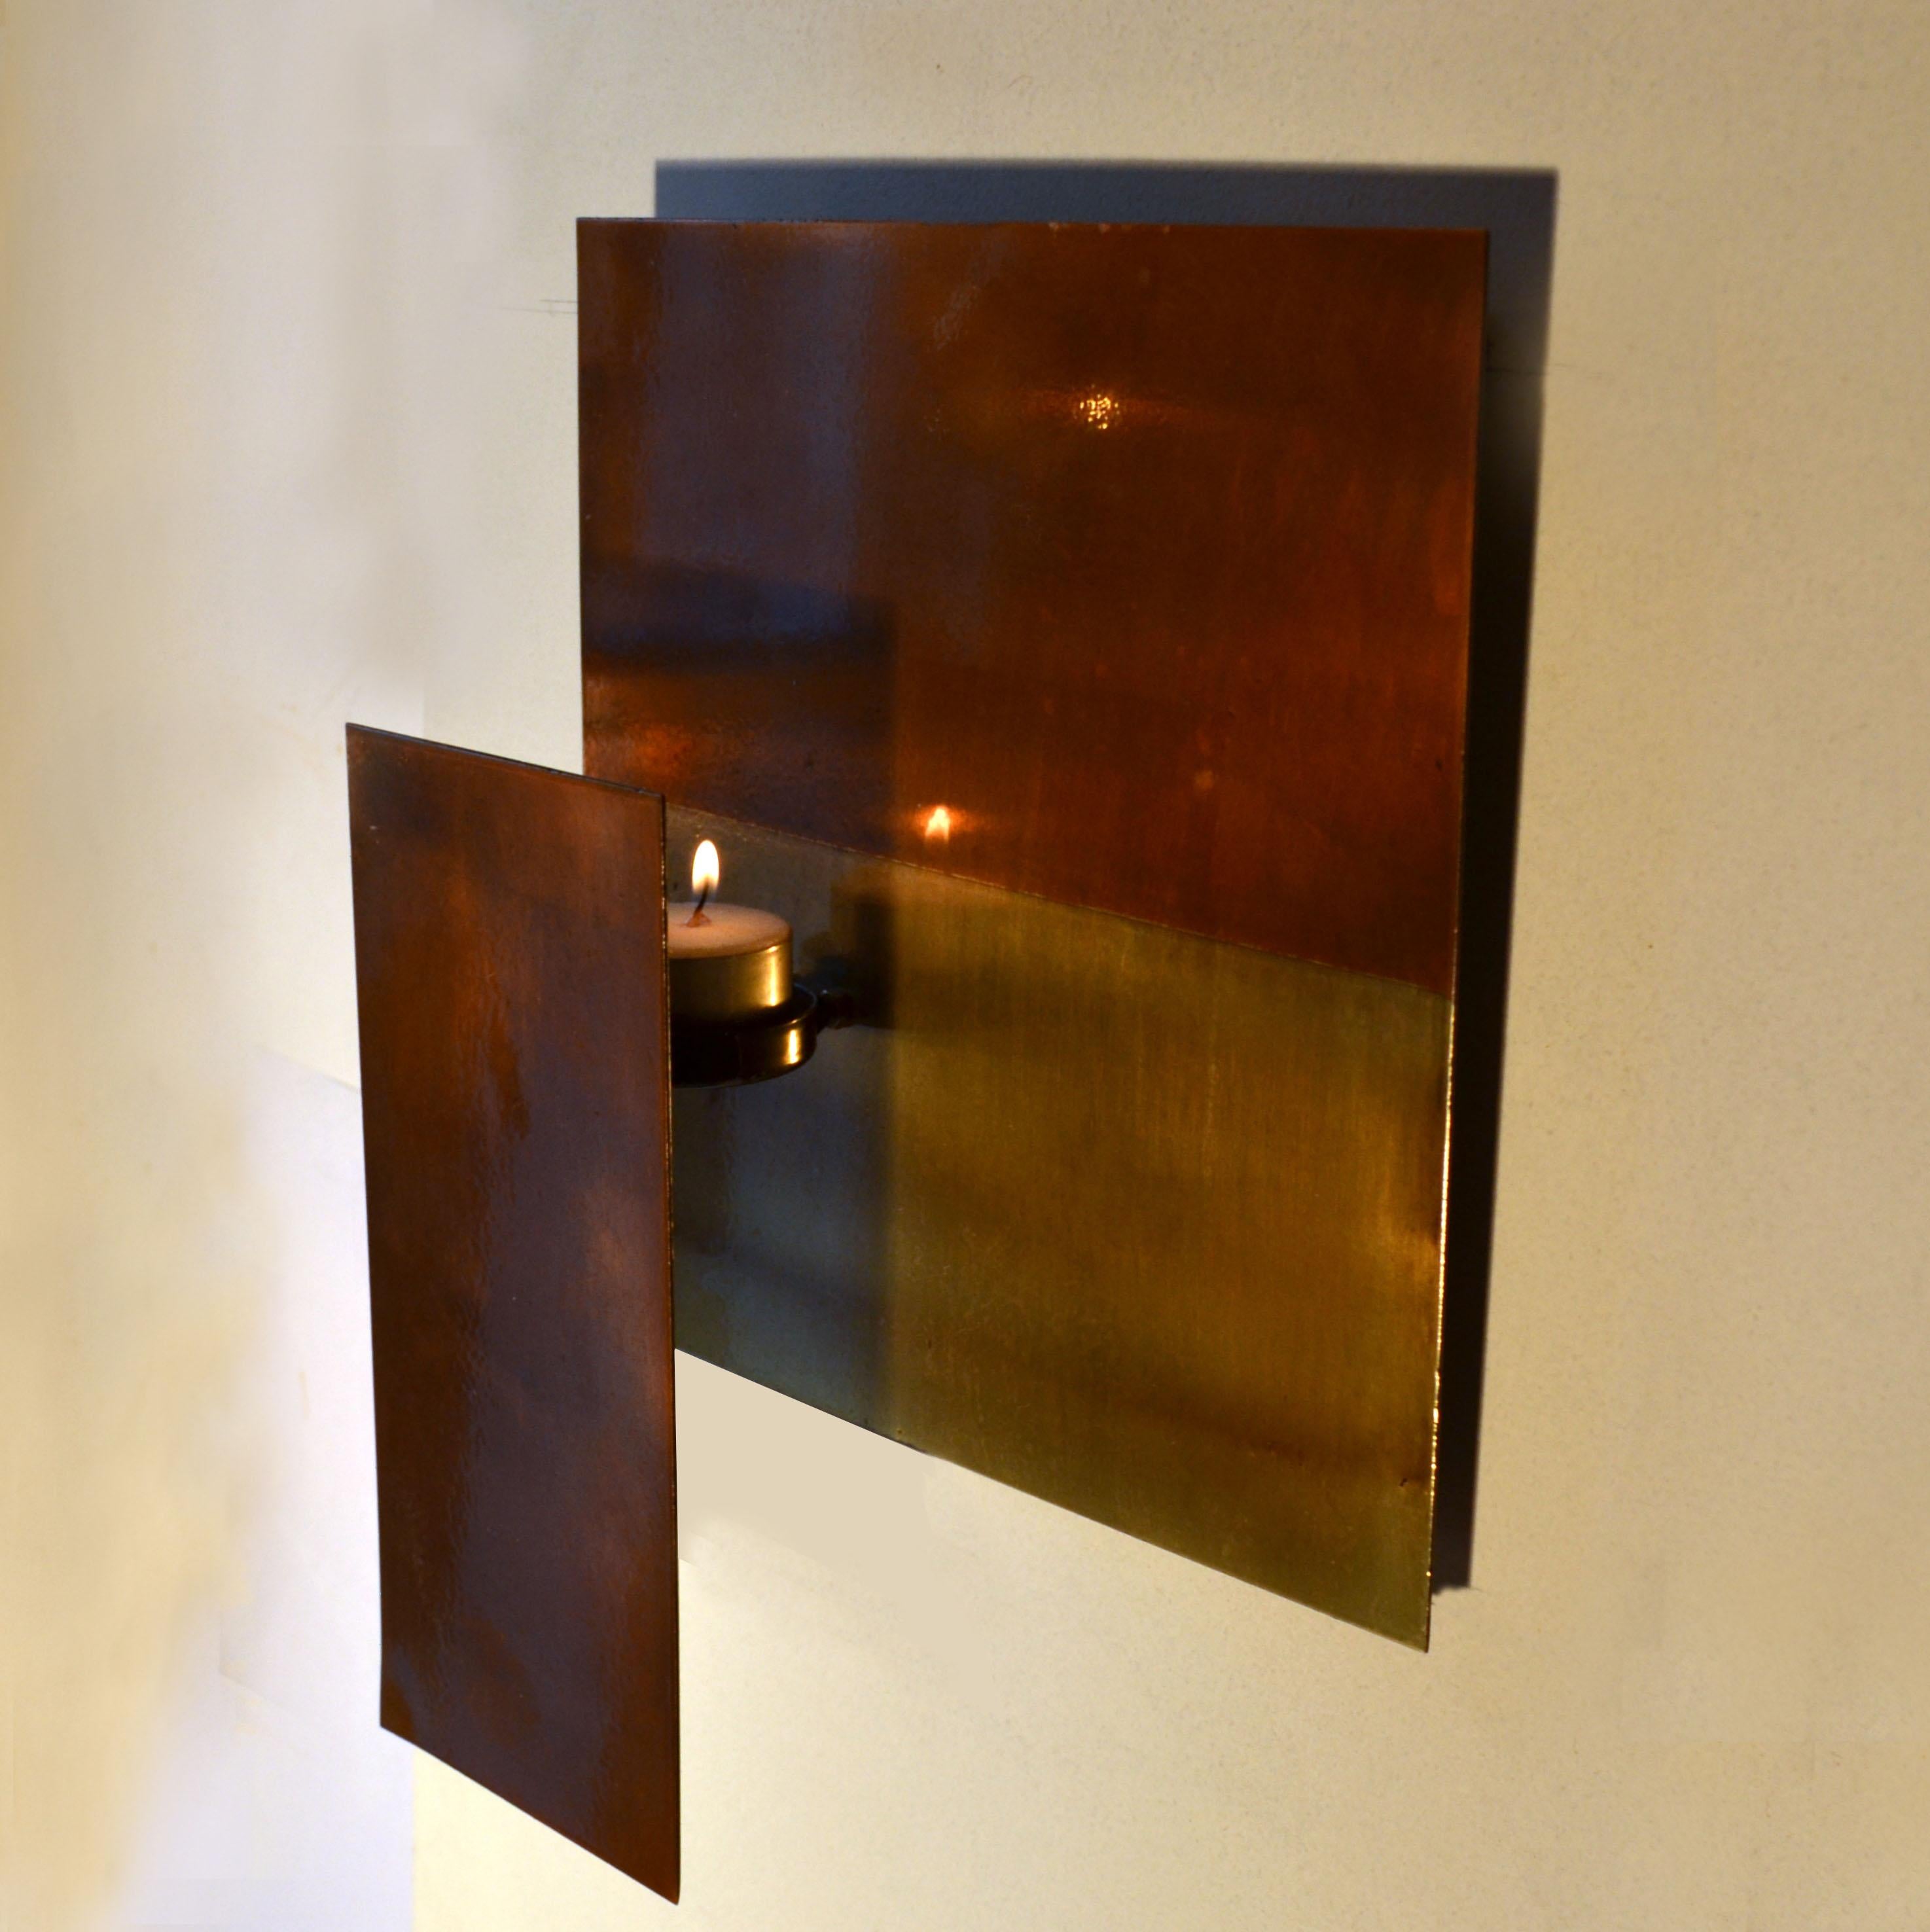 Three geometric minimal wall mounted sculptures that function as candle holders. The surface patina is part of the composition. They can be placed in any preferred order, easily mounted each on two hooks.
The candles used can be tea lights (which